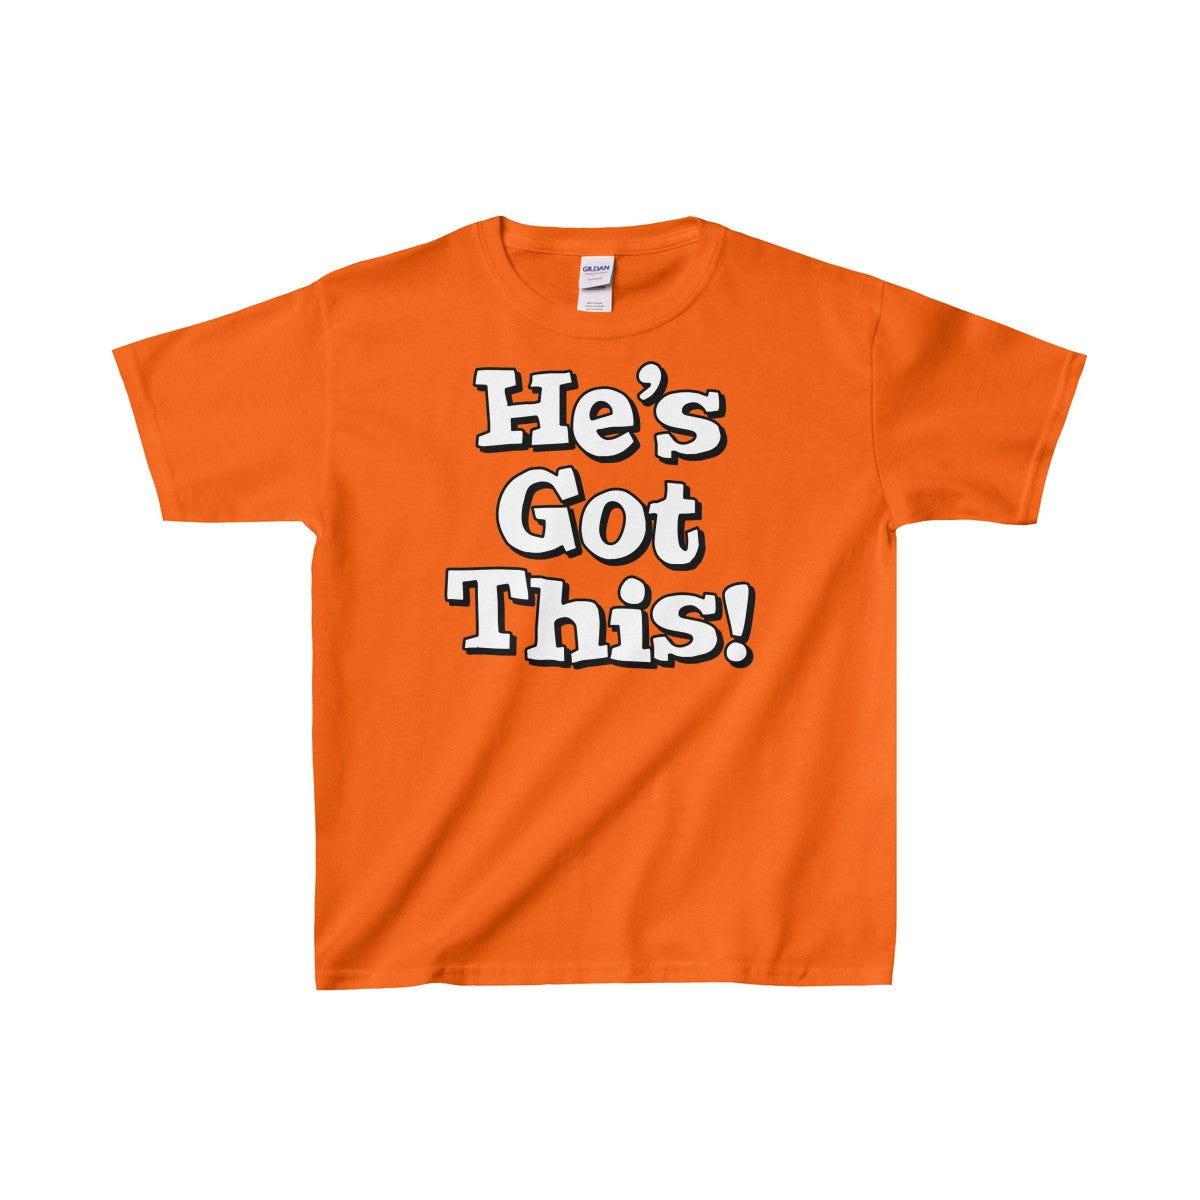 He's Got This! Gildan® Heavy Cotton™ Youth T-Shirt-Kids clothes-PureDesignTees